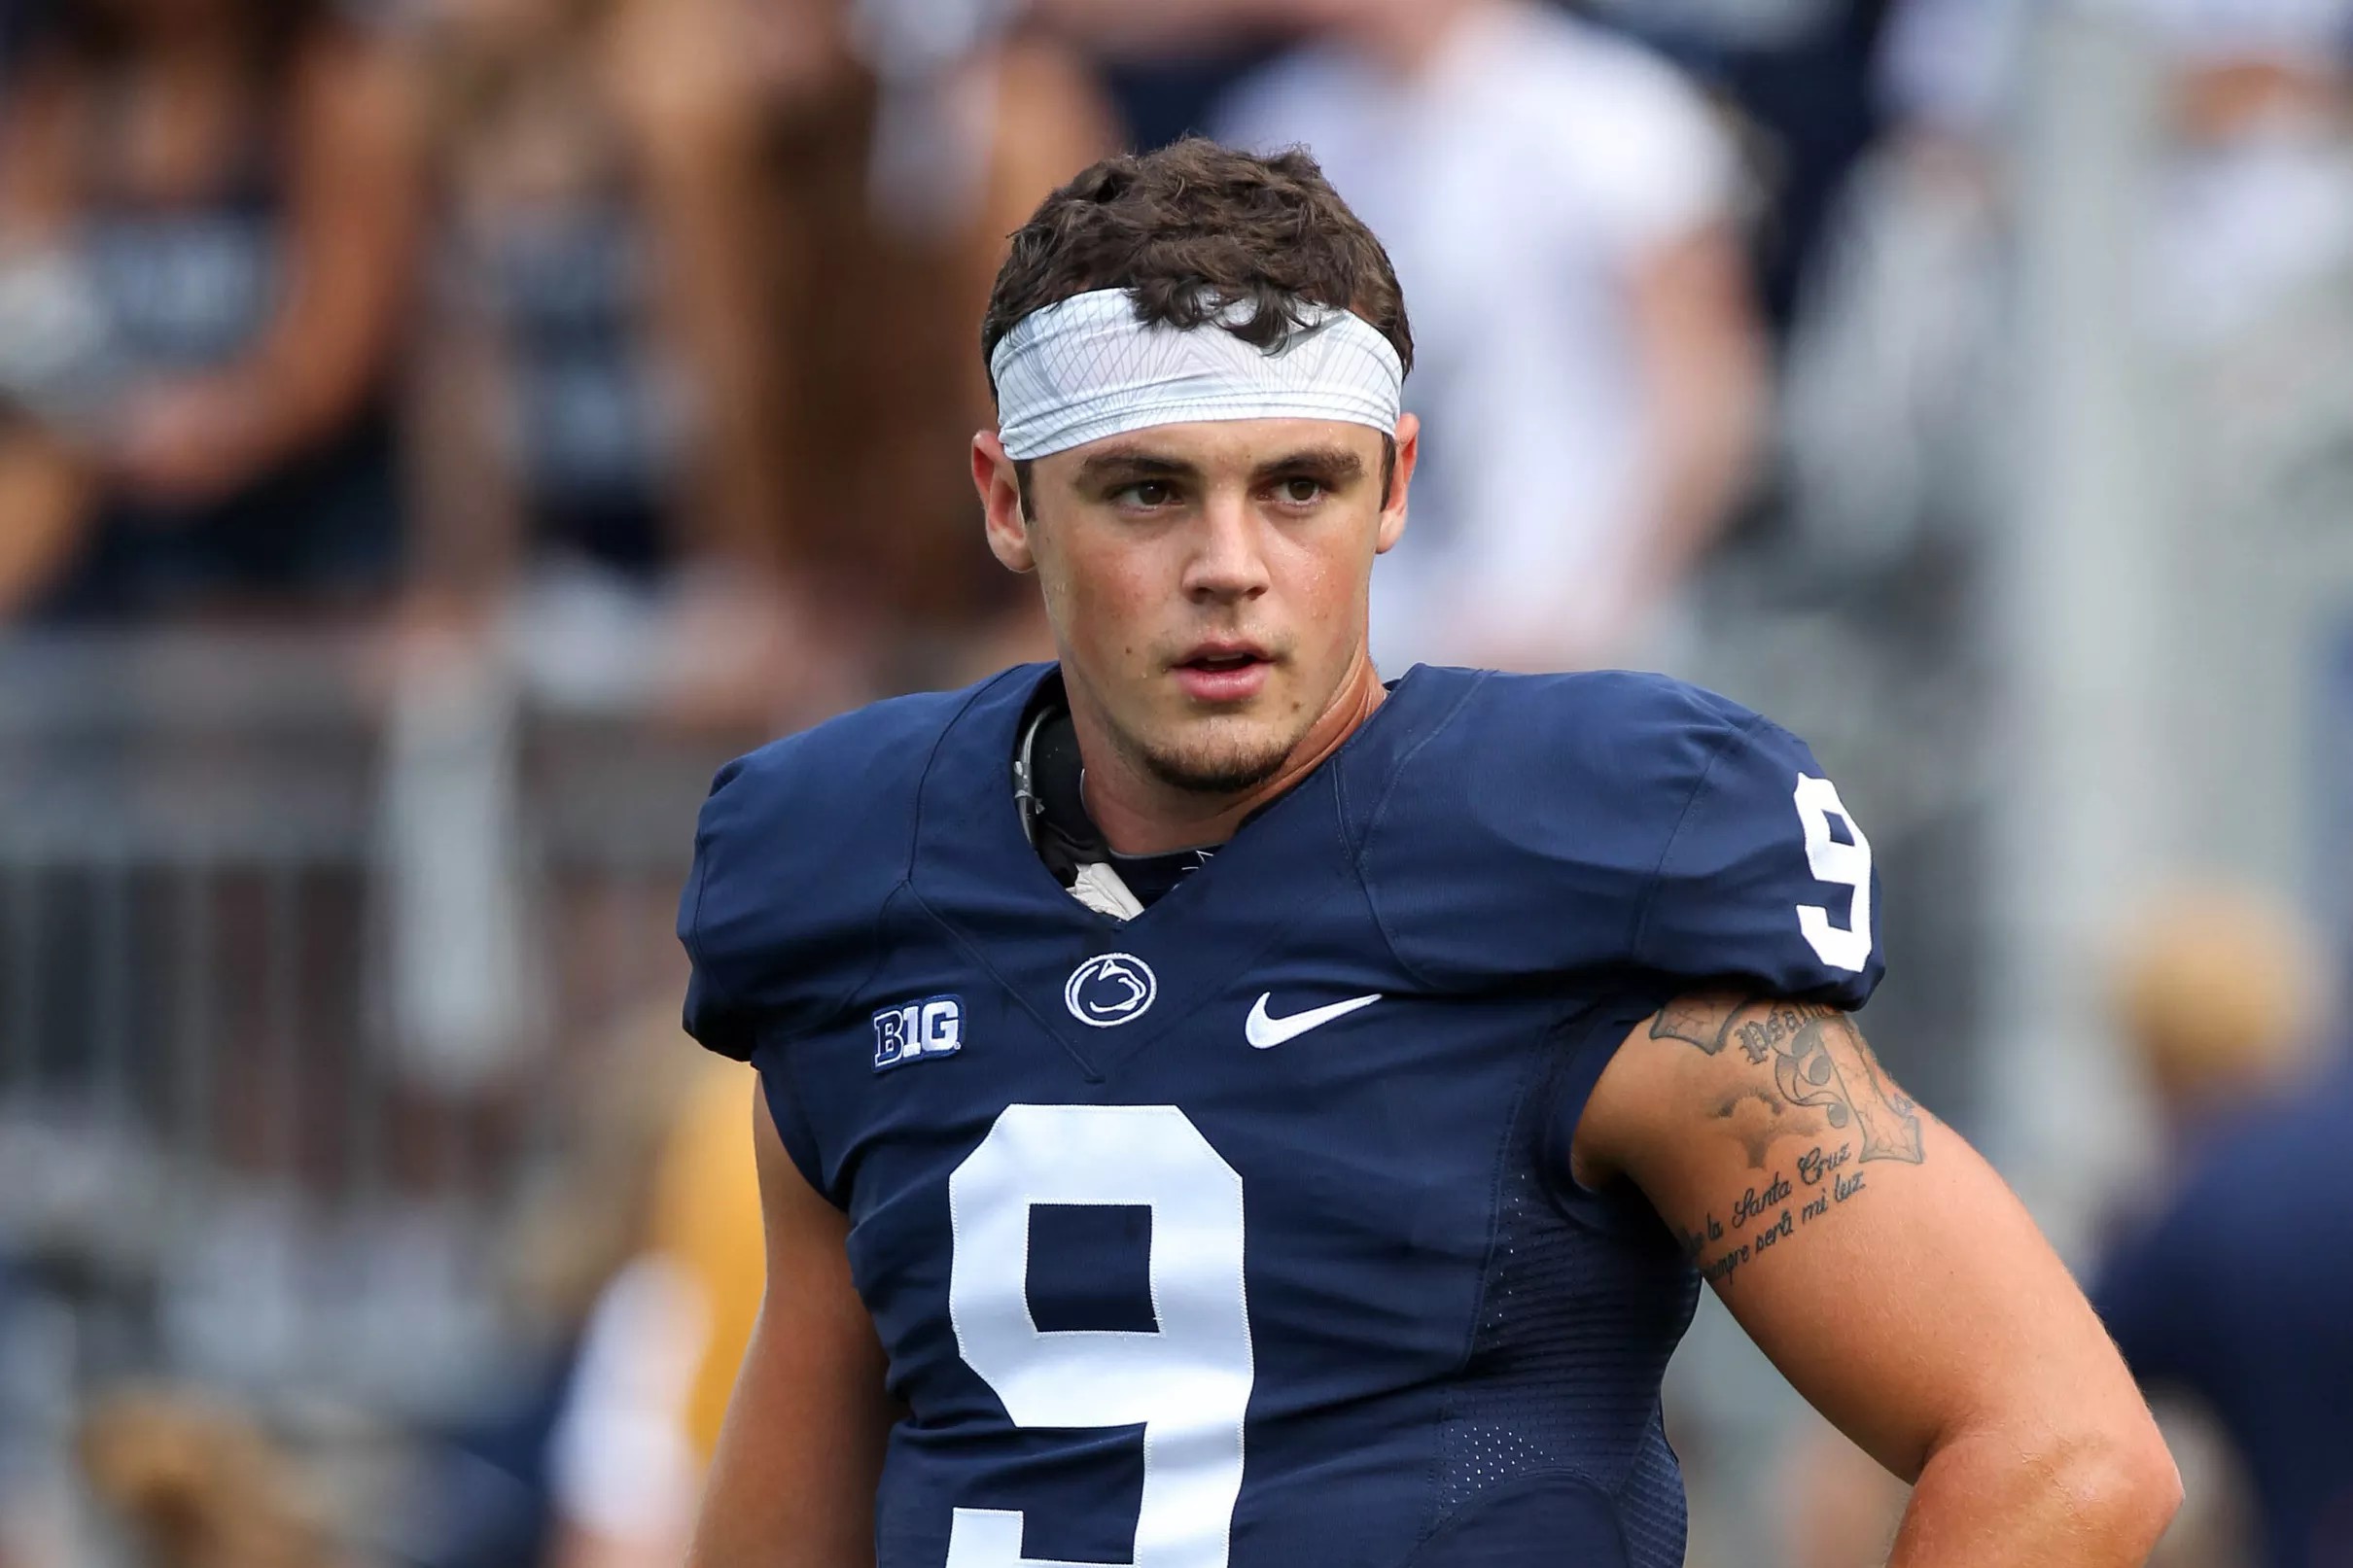 So You Drafted Penn State QB Trace McSorley...